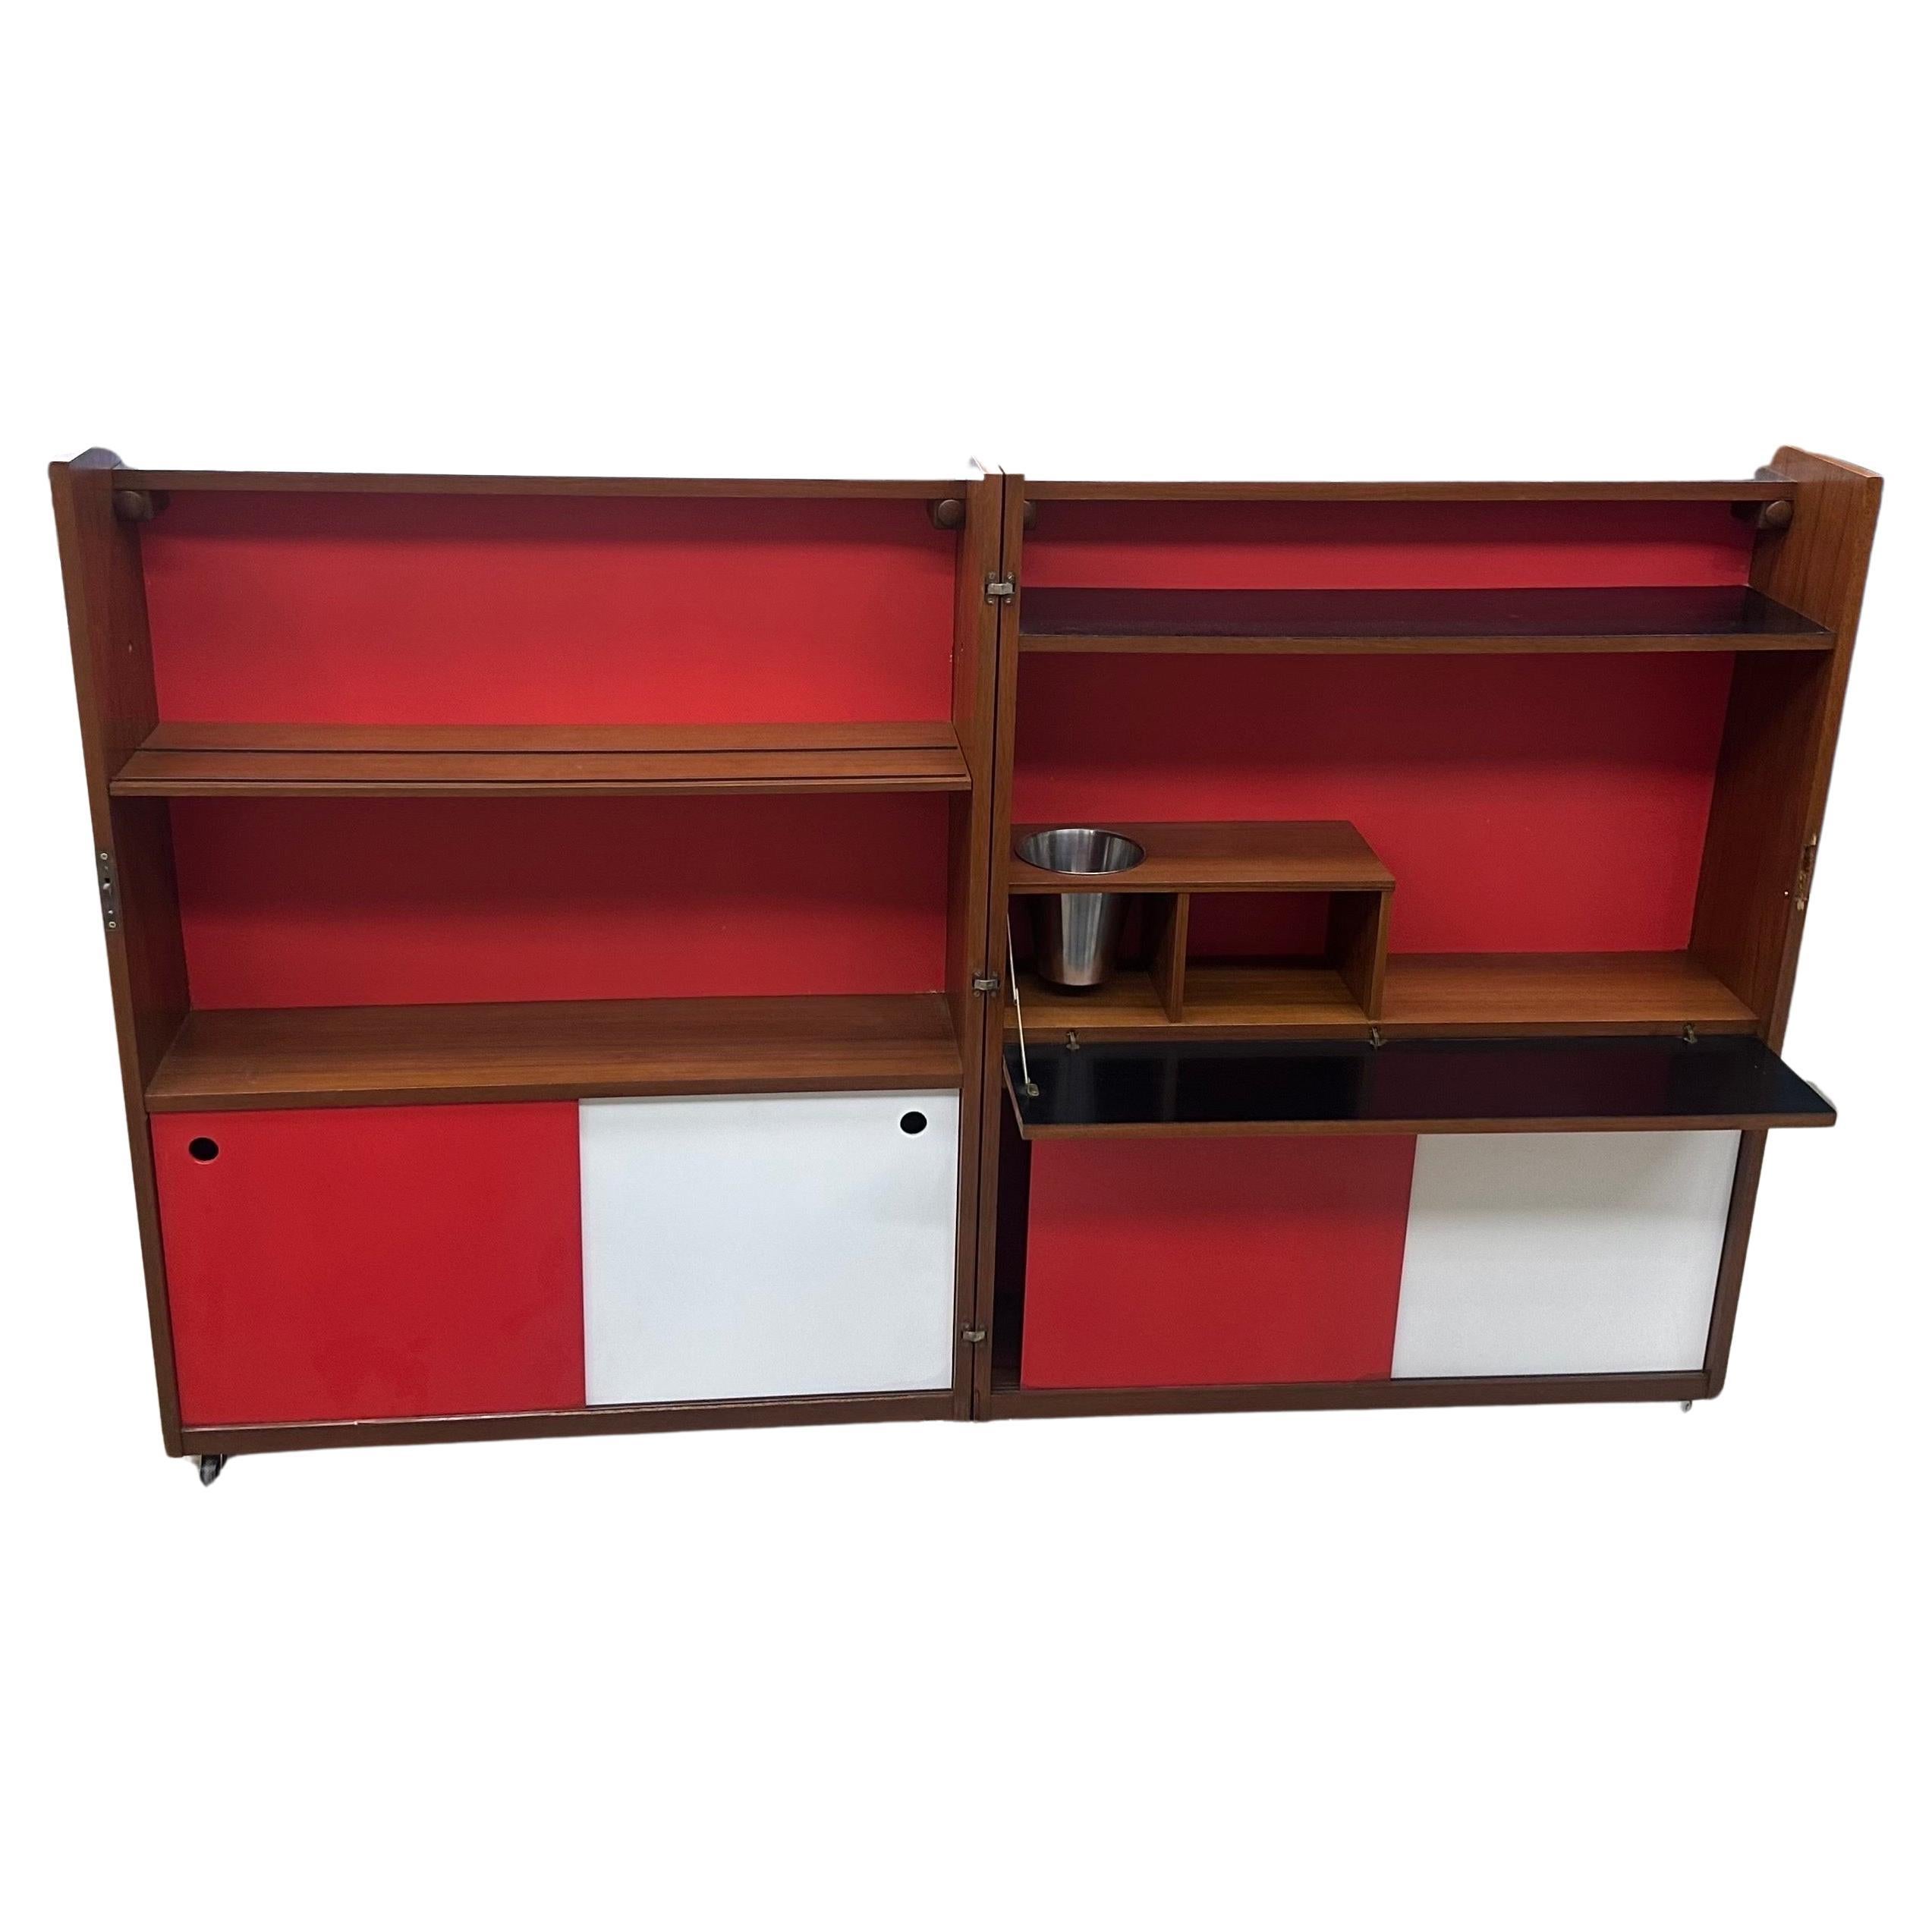 Super cool and unique Danish modern expansion bar cabinet in teak by Johannes Andersen for Drylund, circa 1950s.   This stunning piece of furniture combines functional design with elegant simplicity.  Made from high-quality teak, this bar cabinet